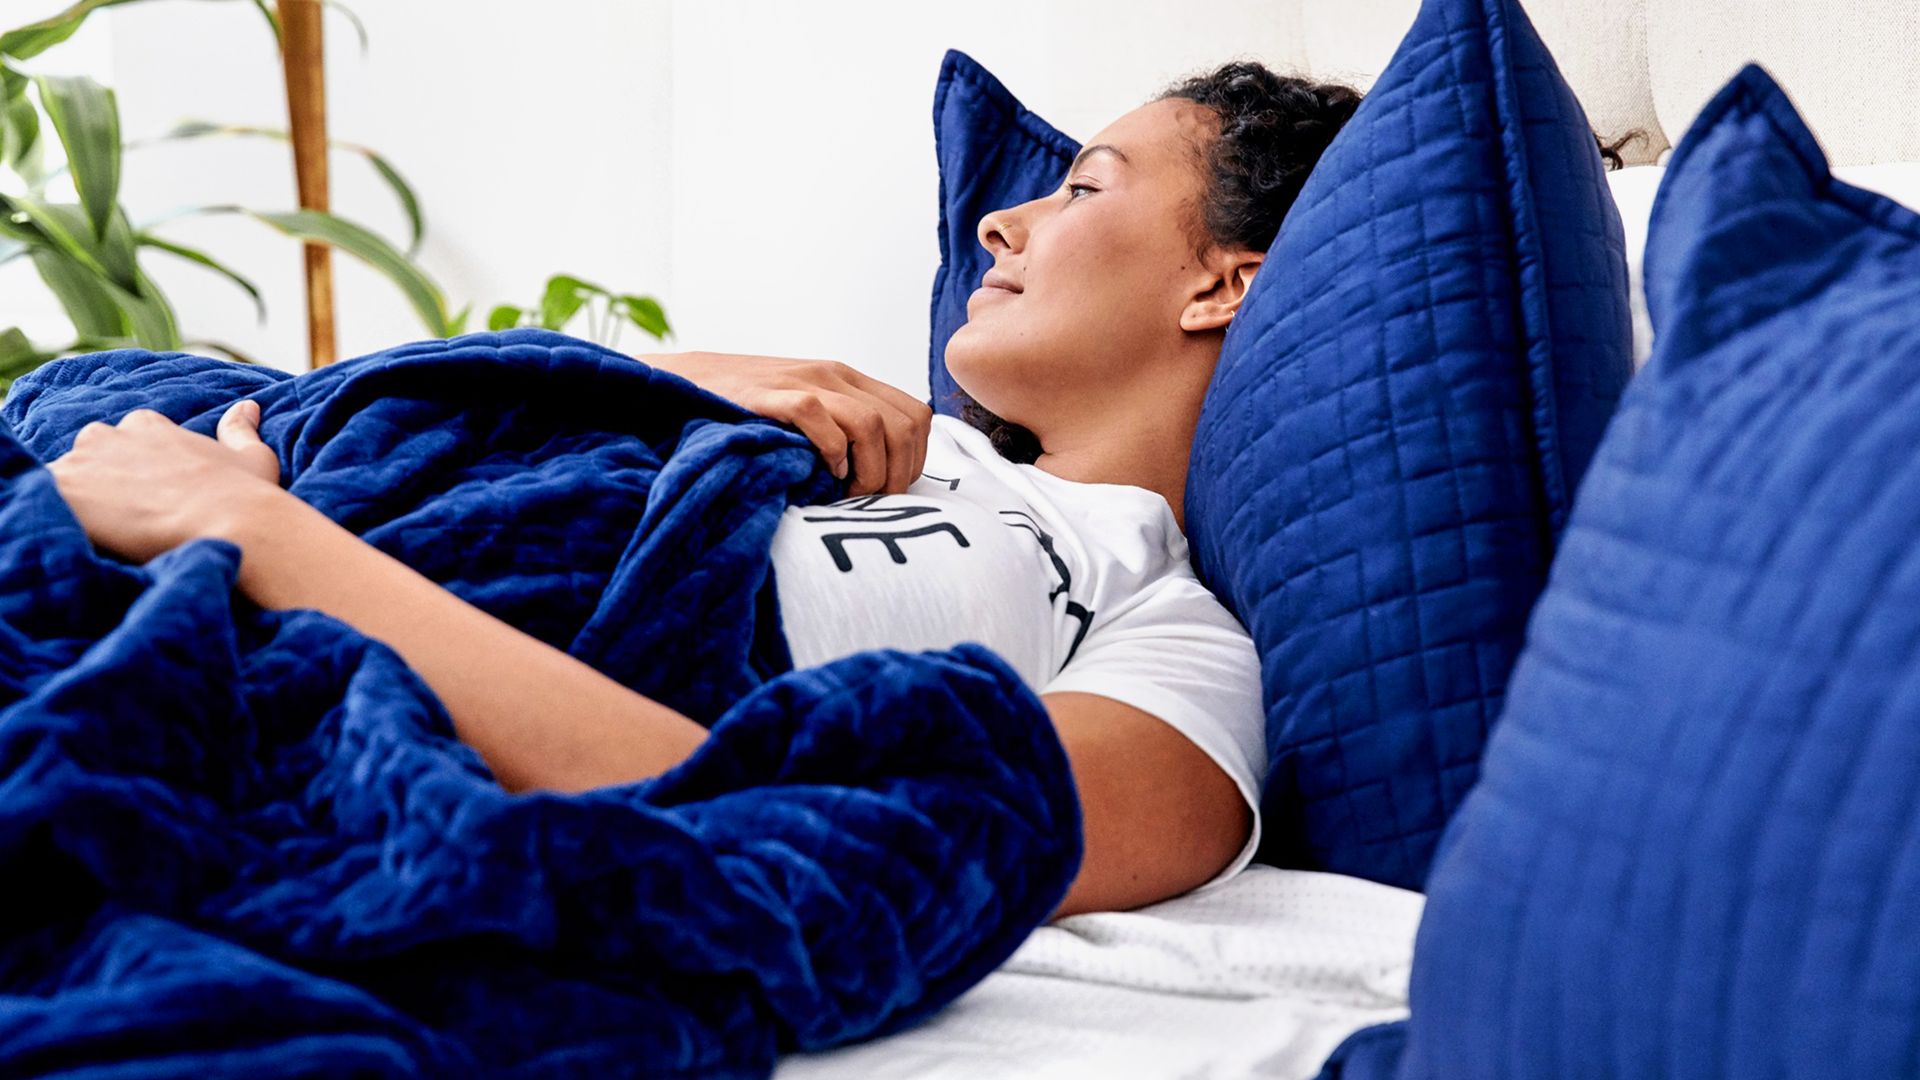 woman lying in bed with blue gravity blanket and pillows